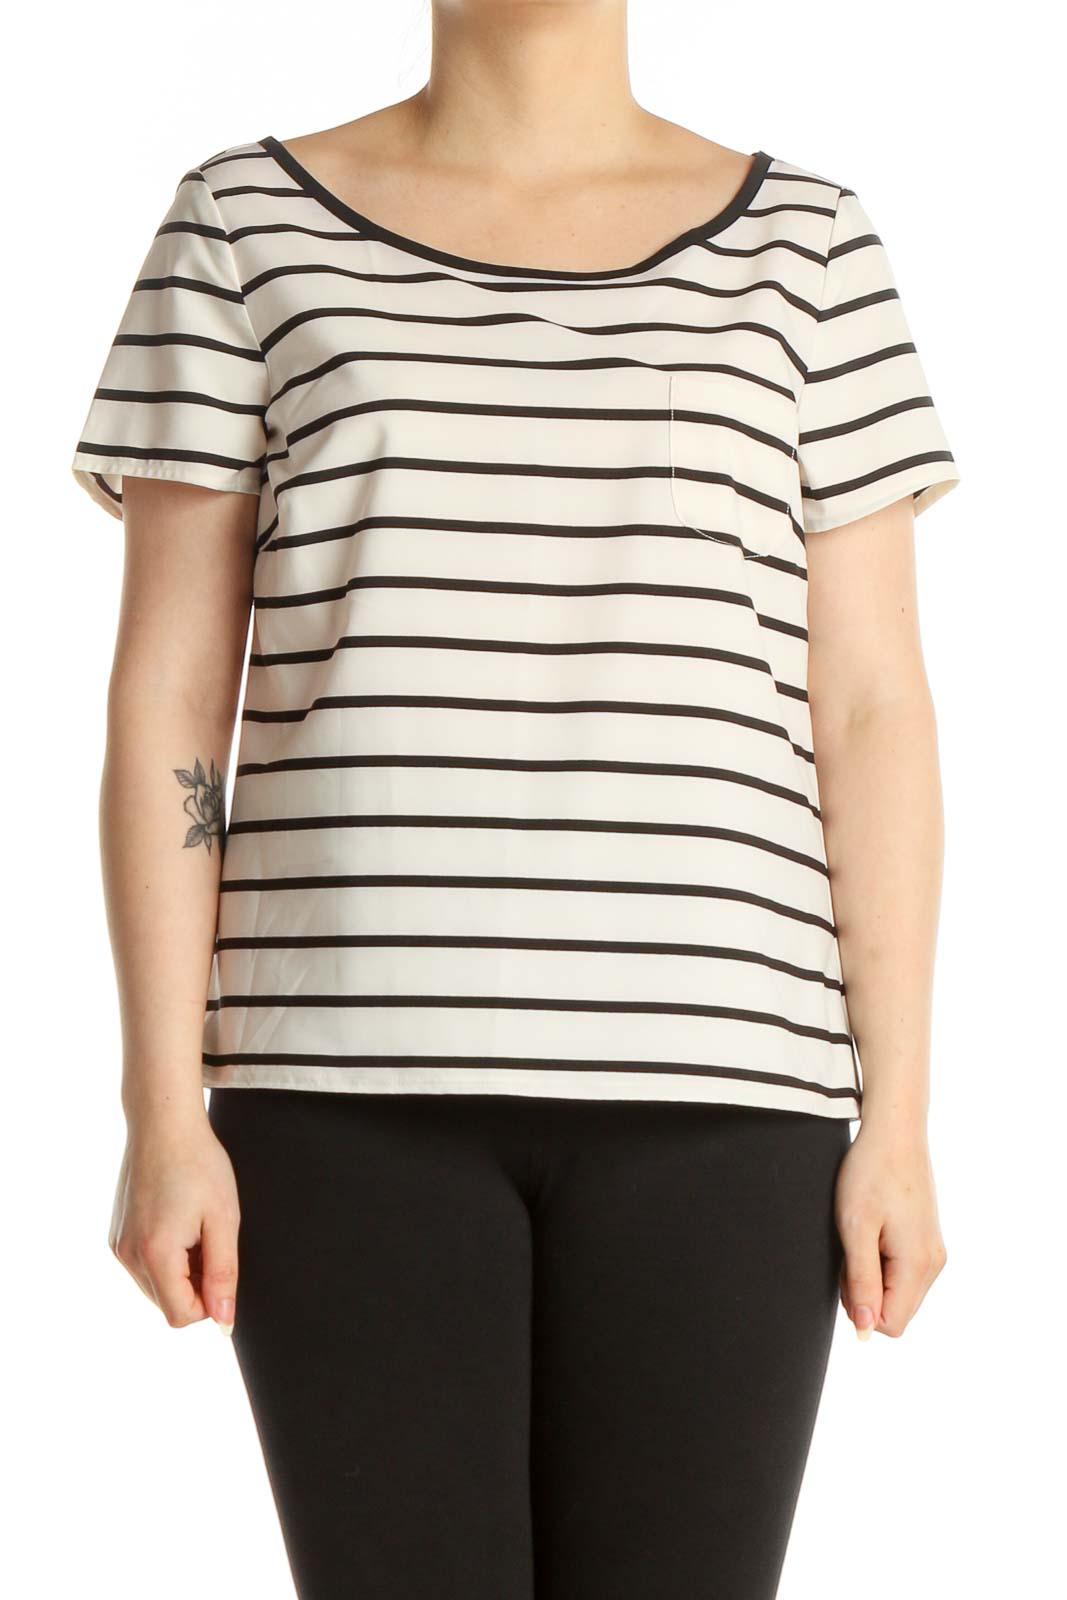 White Striped Casual T-Shirt Front